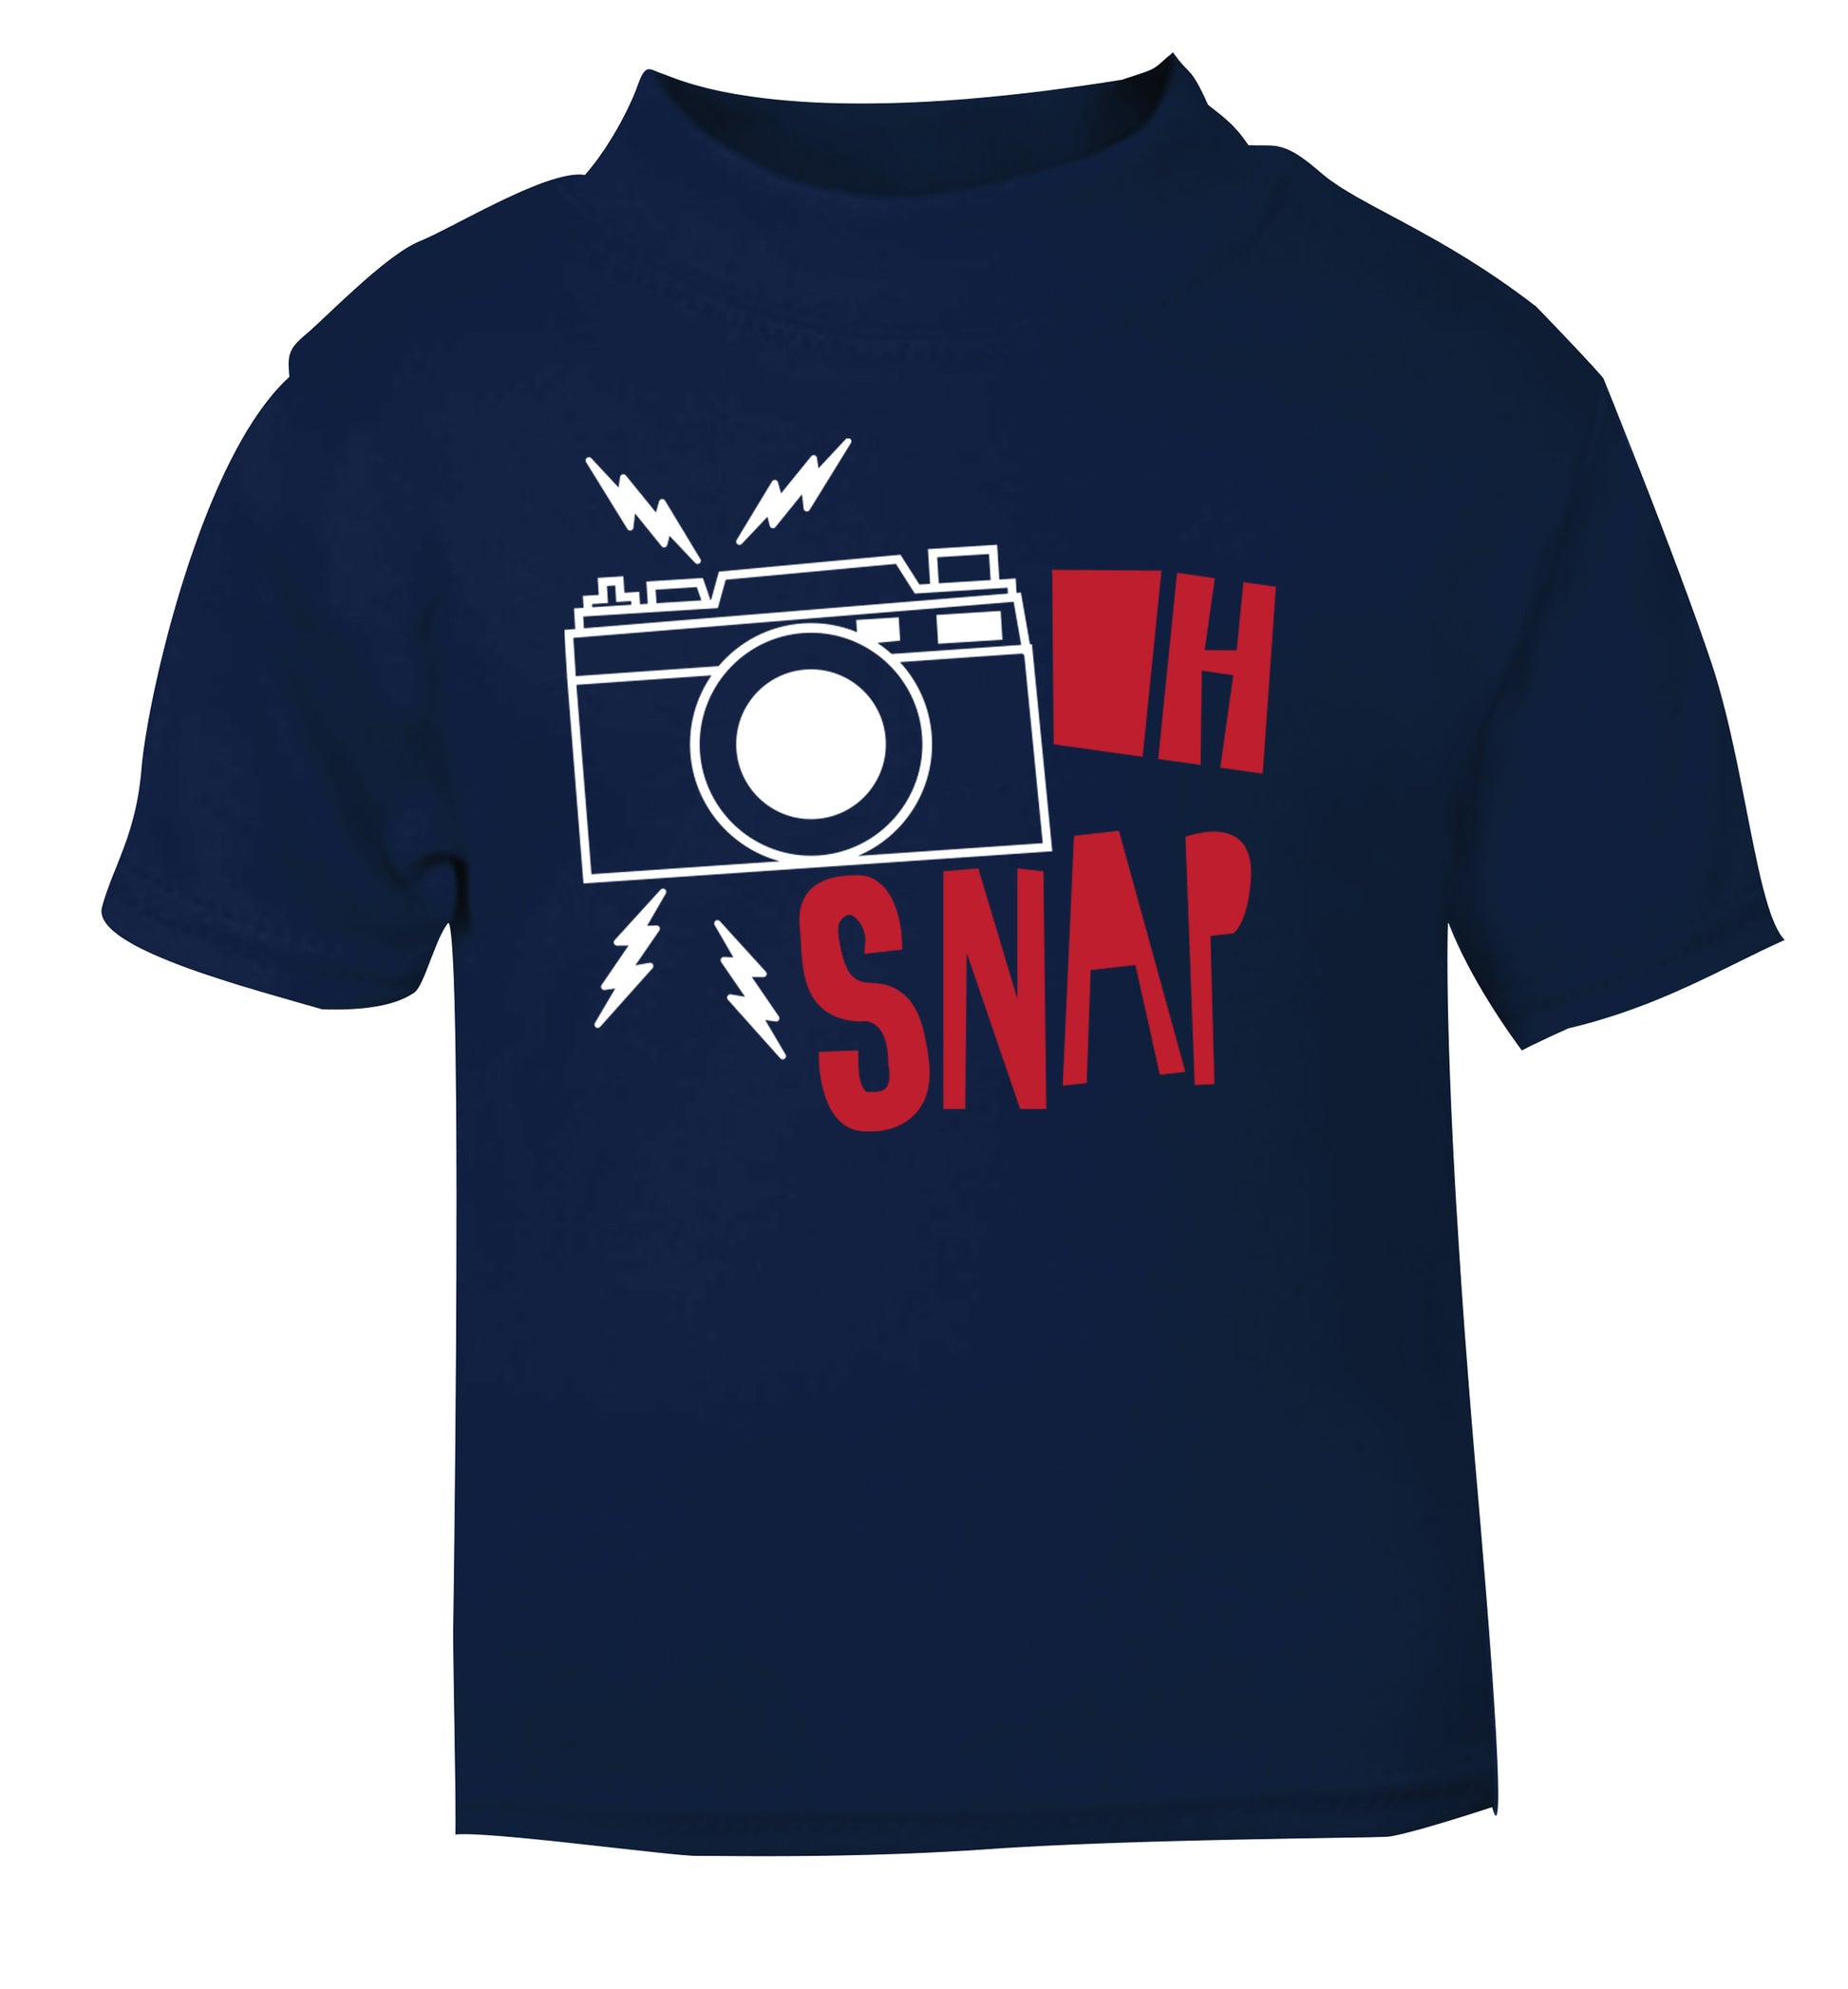 Oh Snap navy Baby Toddler Tshirt 2 Years